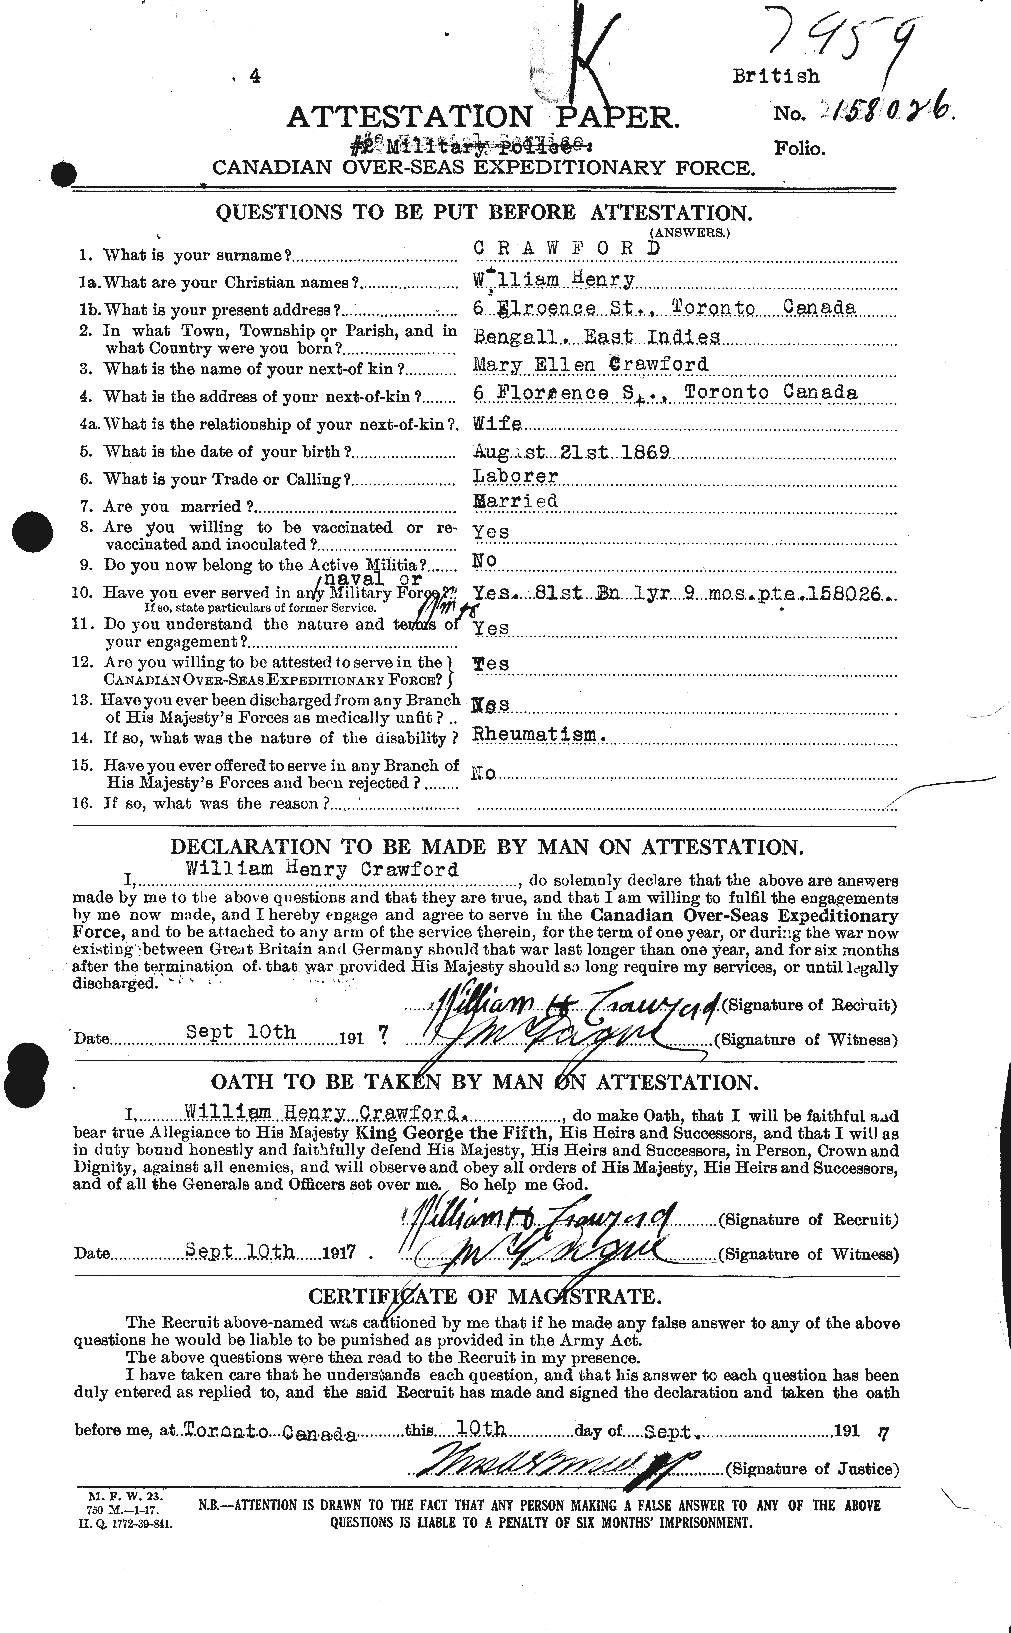 Personnel Records of the First World War - CEF 061137a